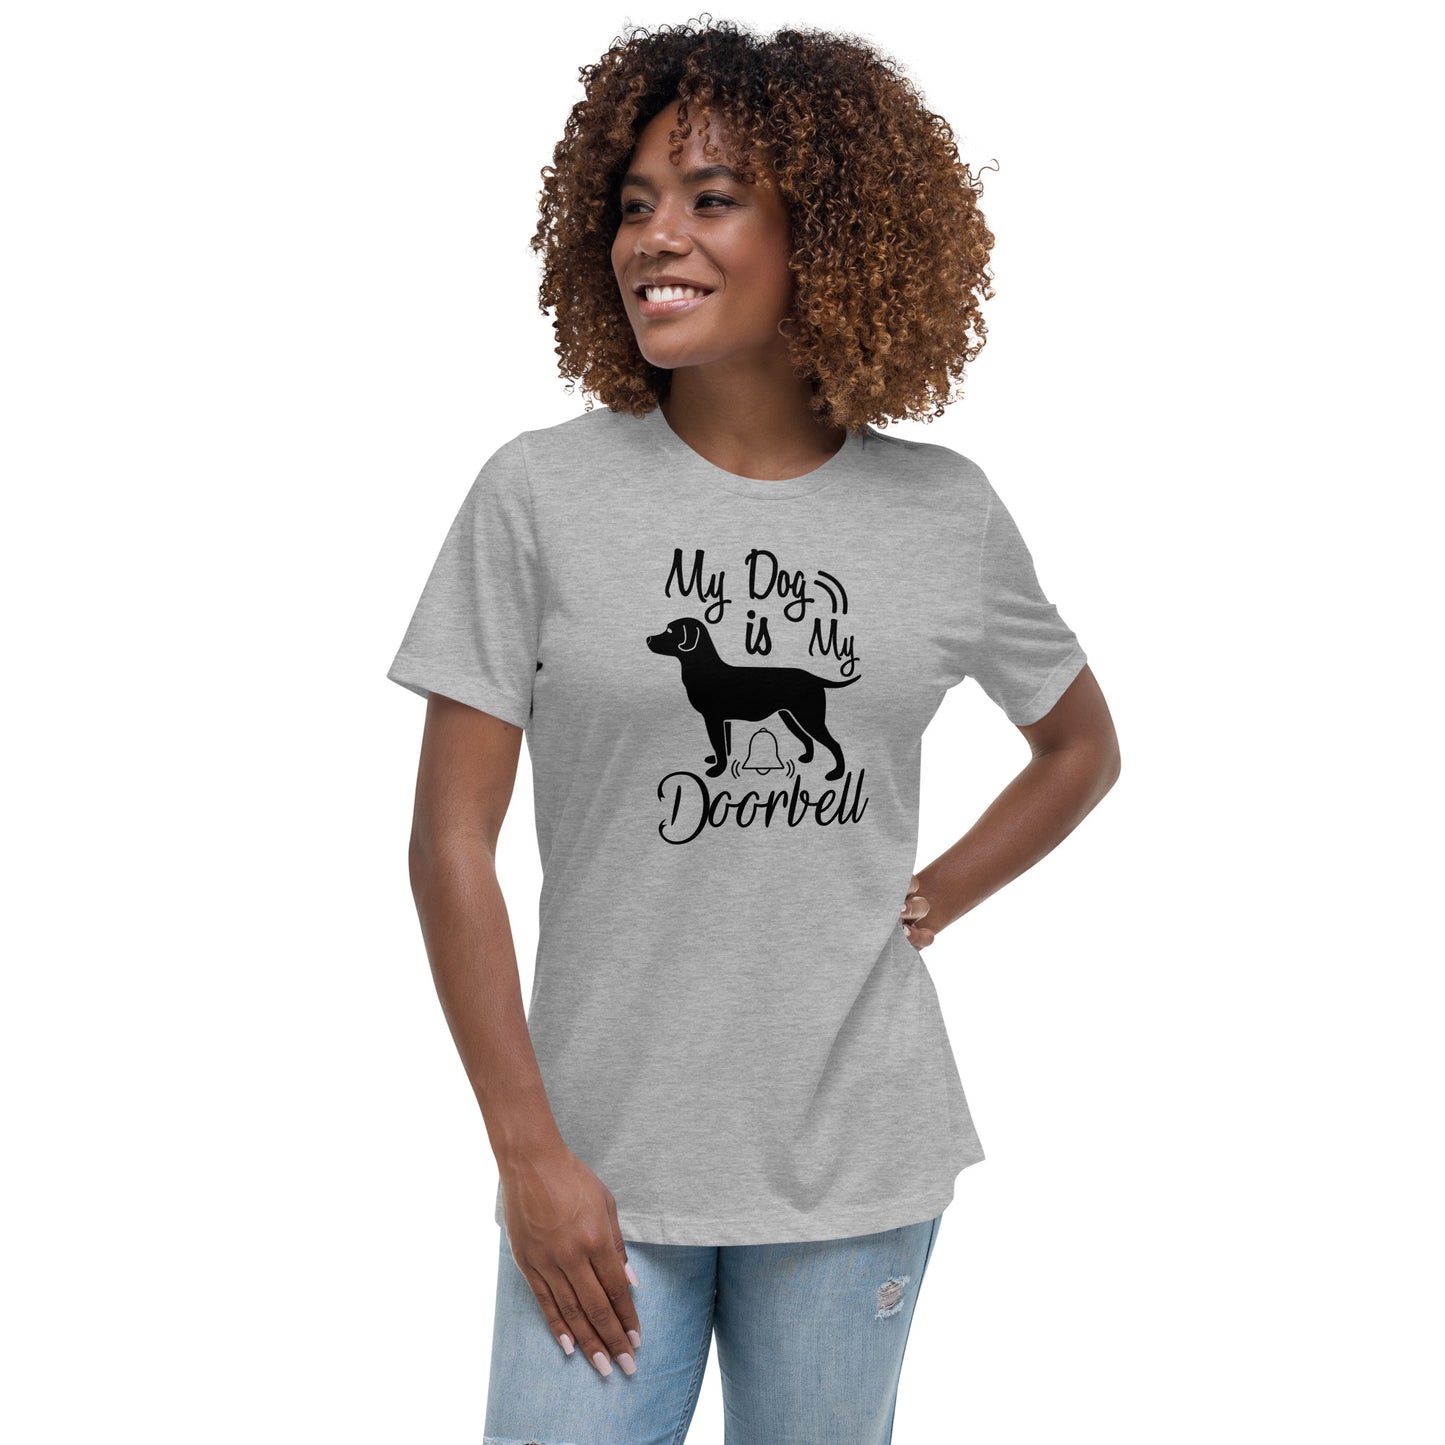 Funny Dog T-shirt Sayings - My Dog is my Door Bell